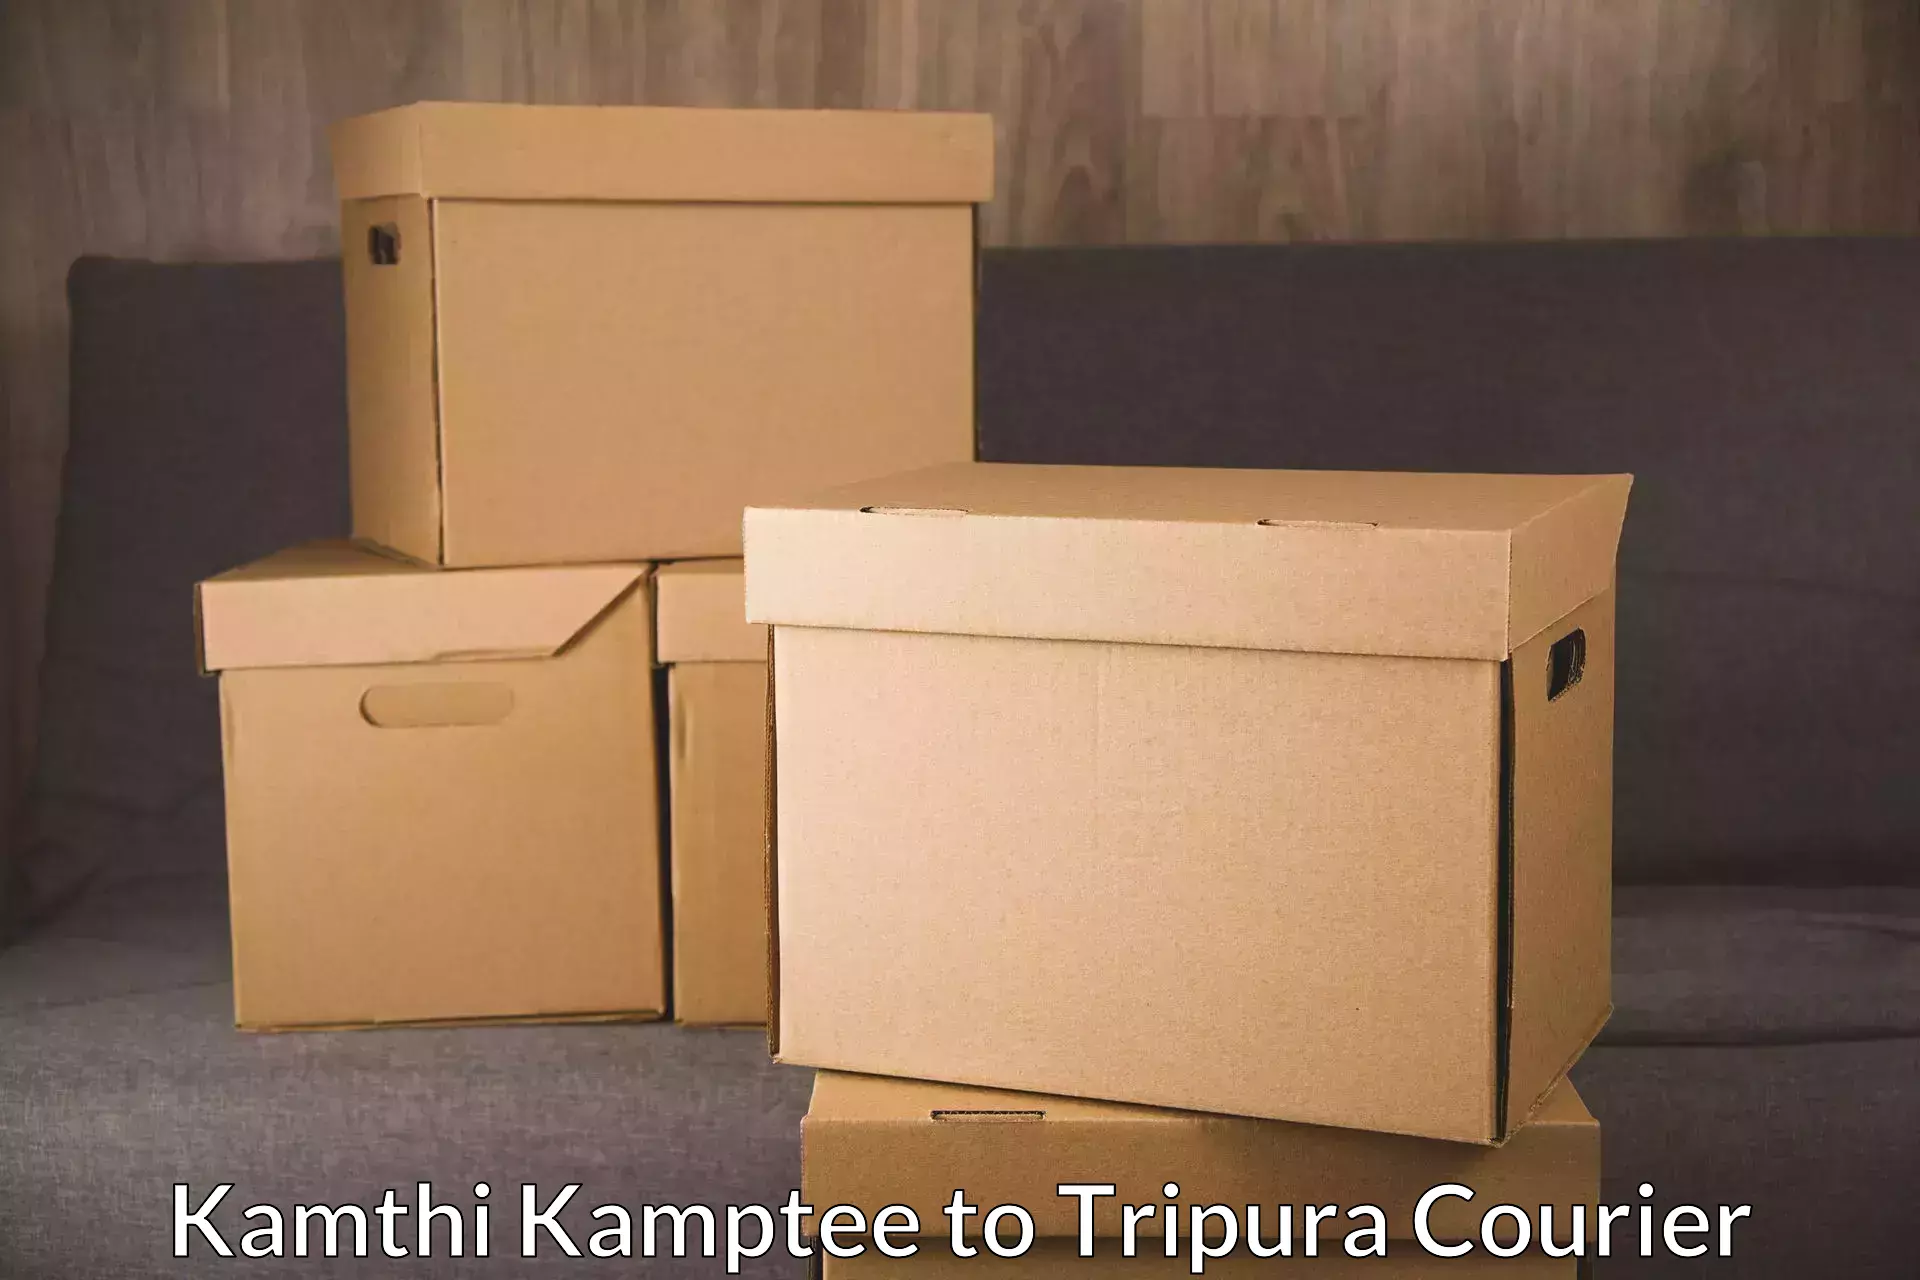 Modern delivery technologies in Kamthi Kamptee to Tripura